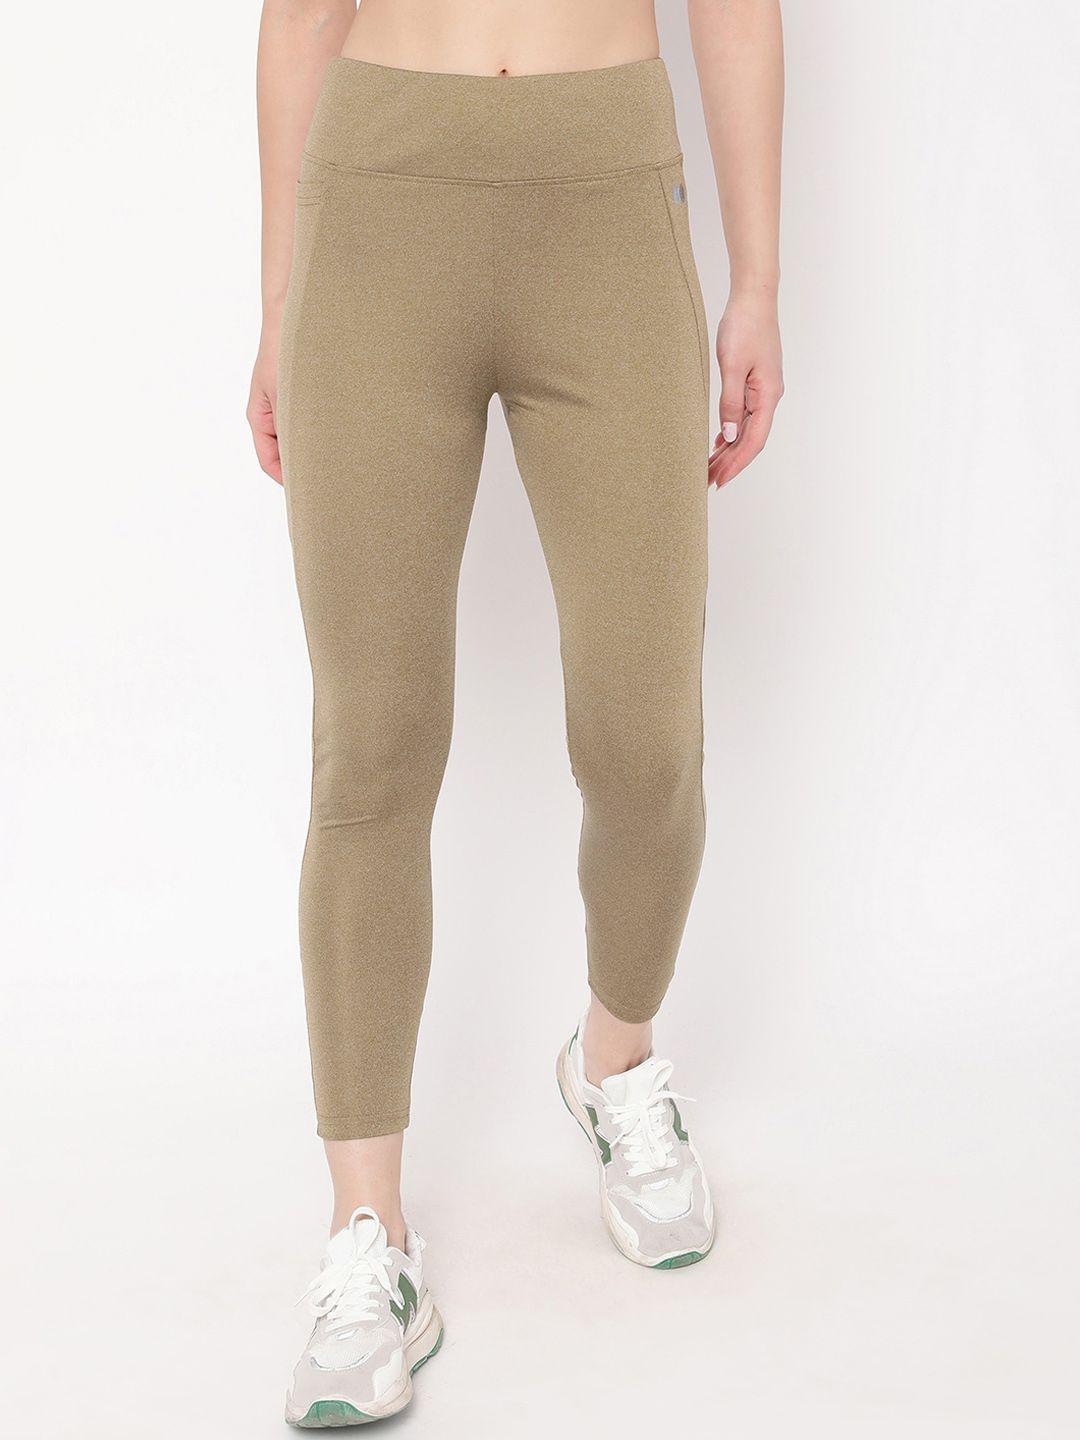 clovia-women-olive-green-rapid-dry-high-rise-ankle-length-training-or-gym-tights